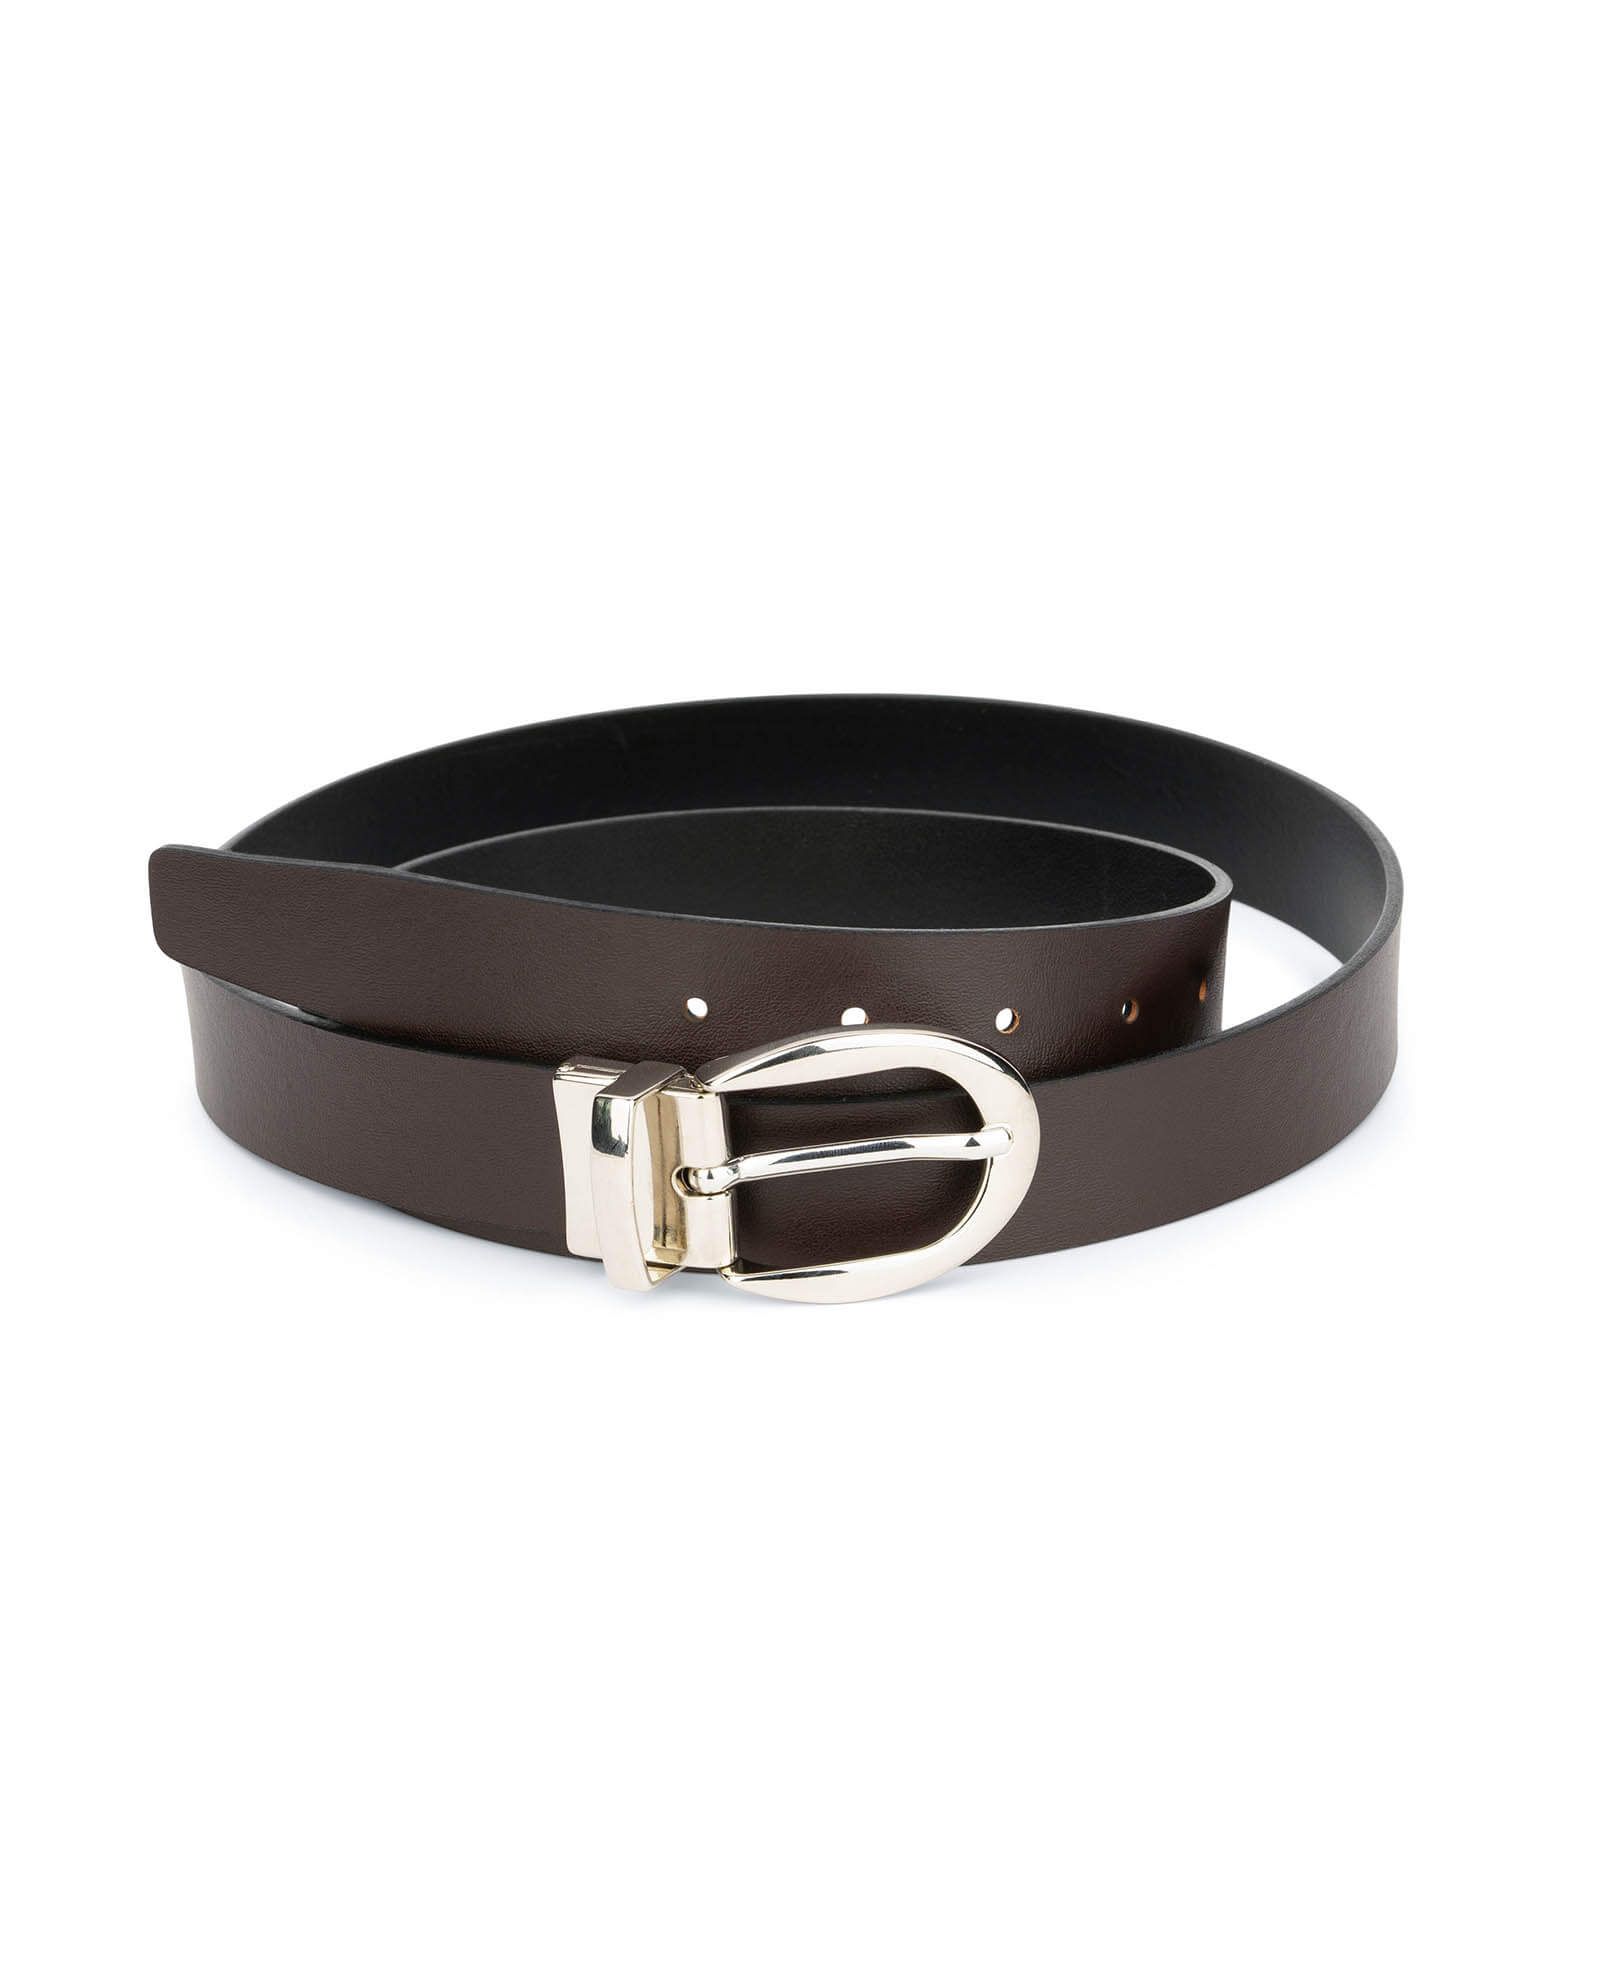 Women's Belts - Leather, Reversible & More